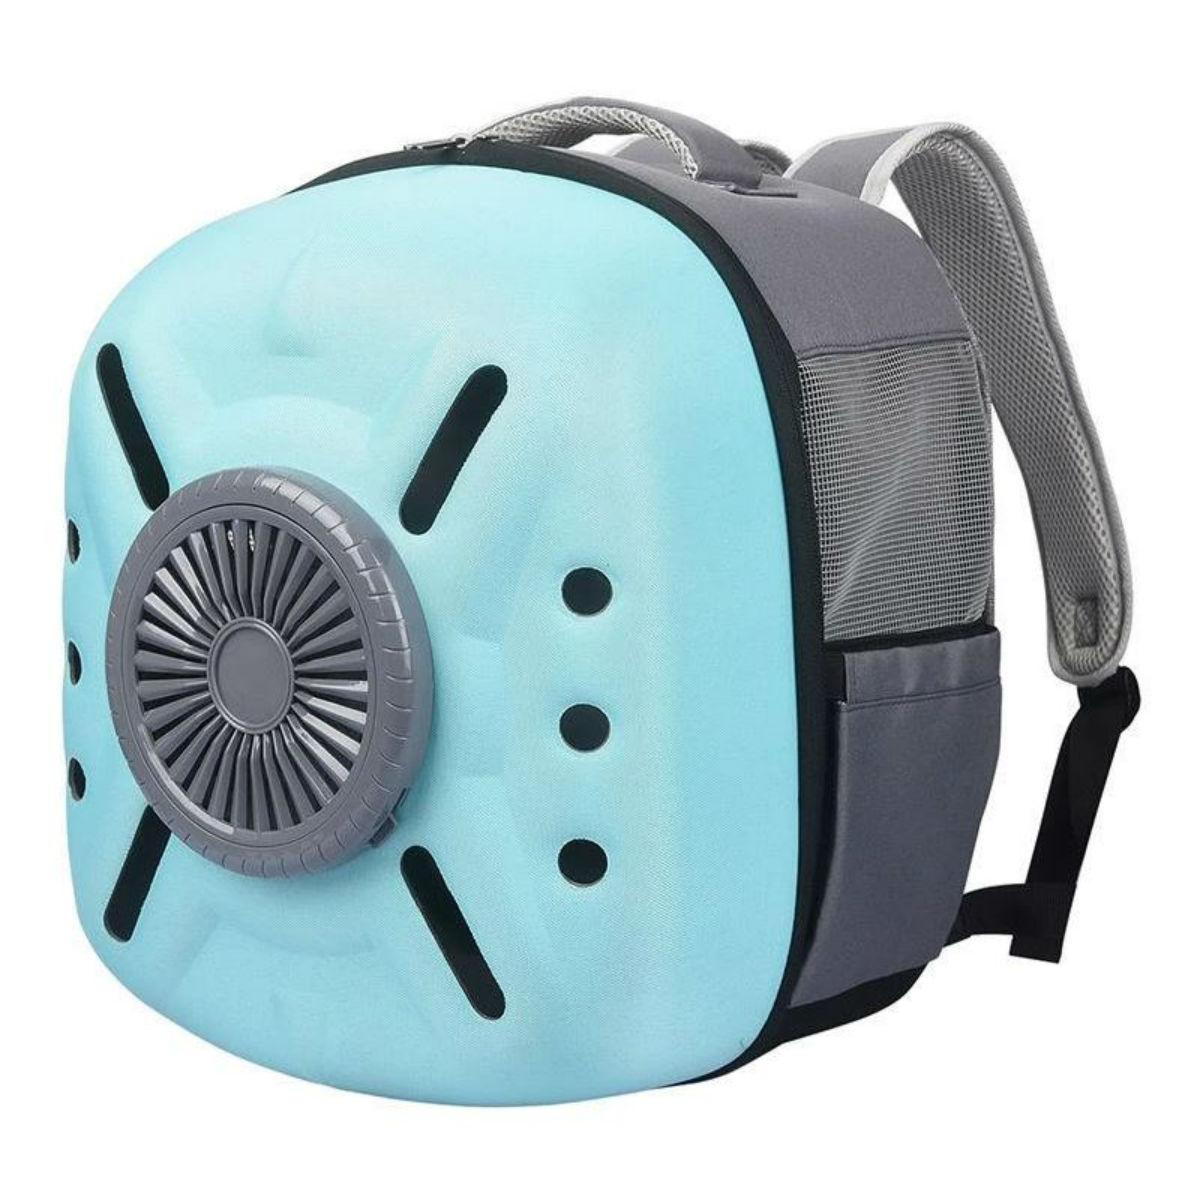 Pet Life Armor-Vent Backpack Carrier for Dogs and Cats with Built-in Cooling Fan - Blue